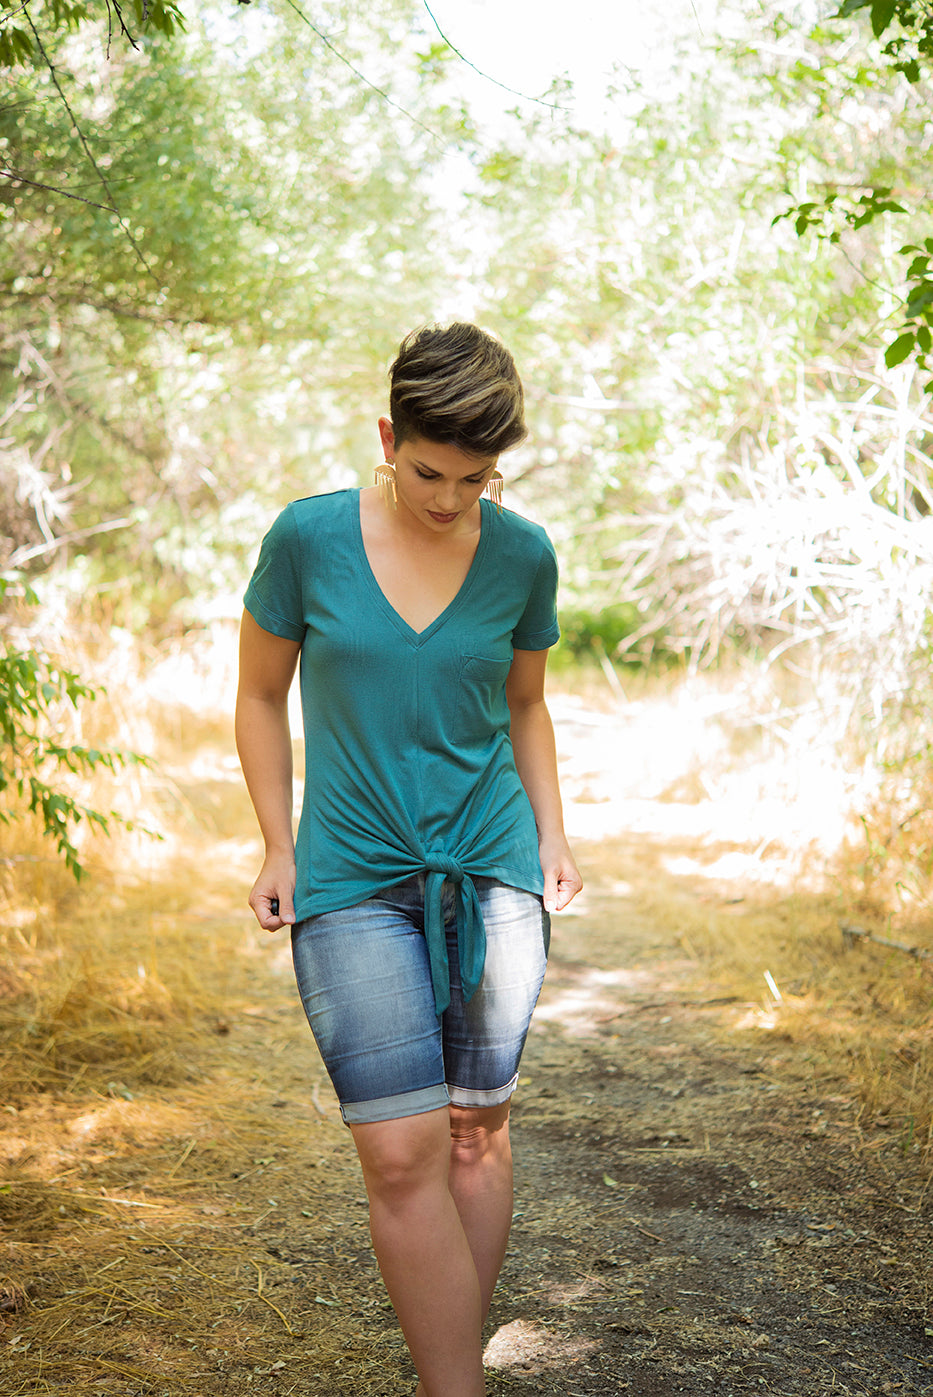 The Harriet featuring a shirt length bodice, plunging v-neck, and short sleeves.